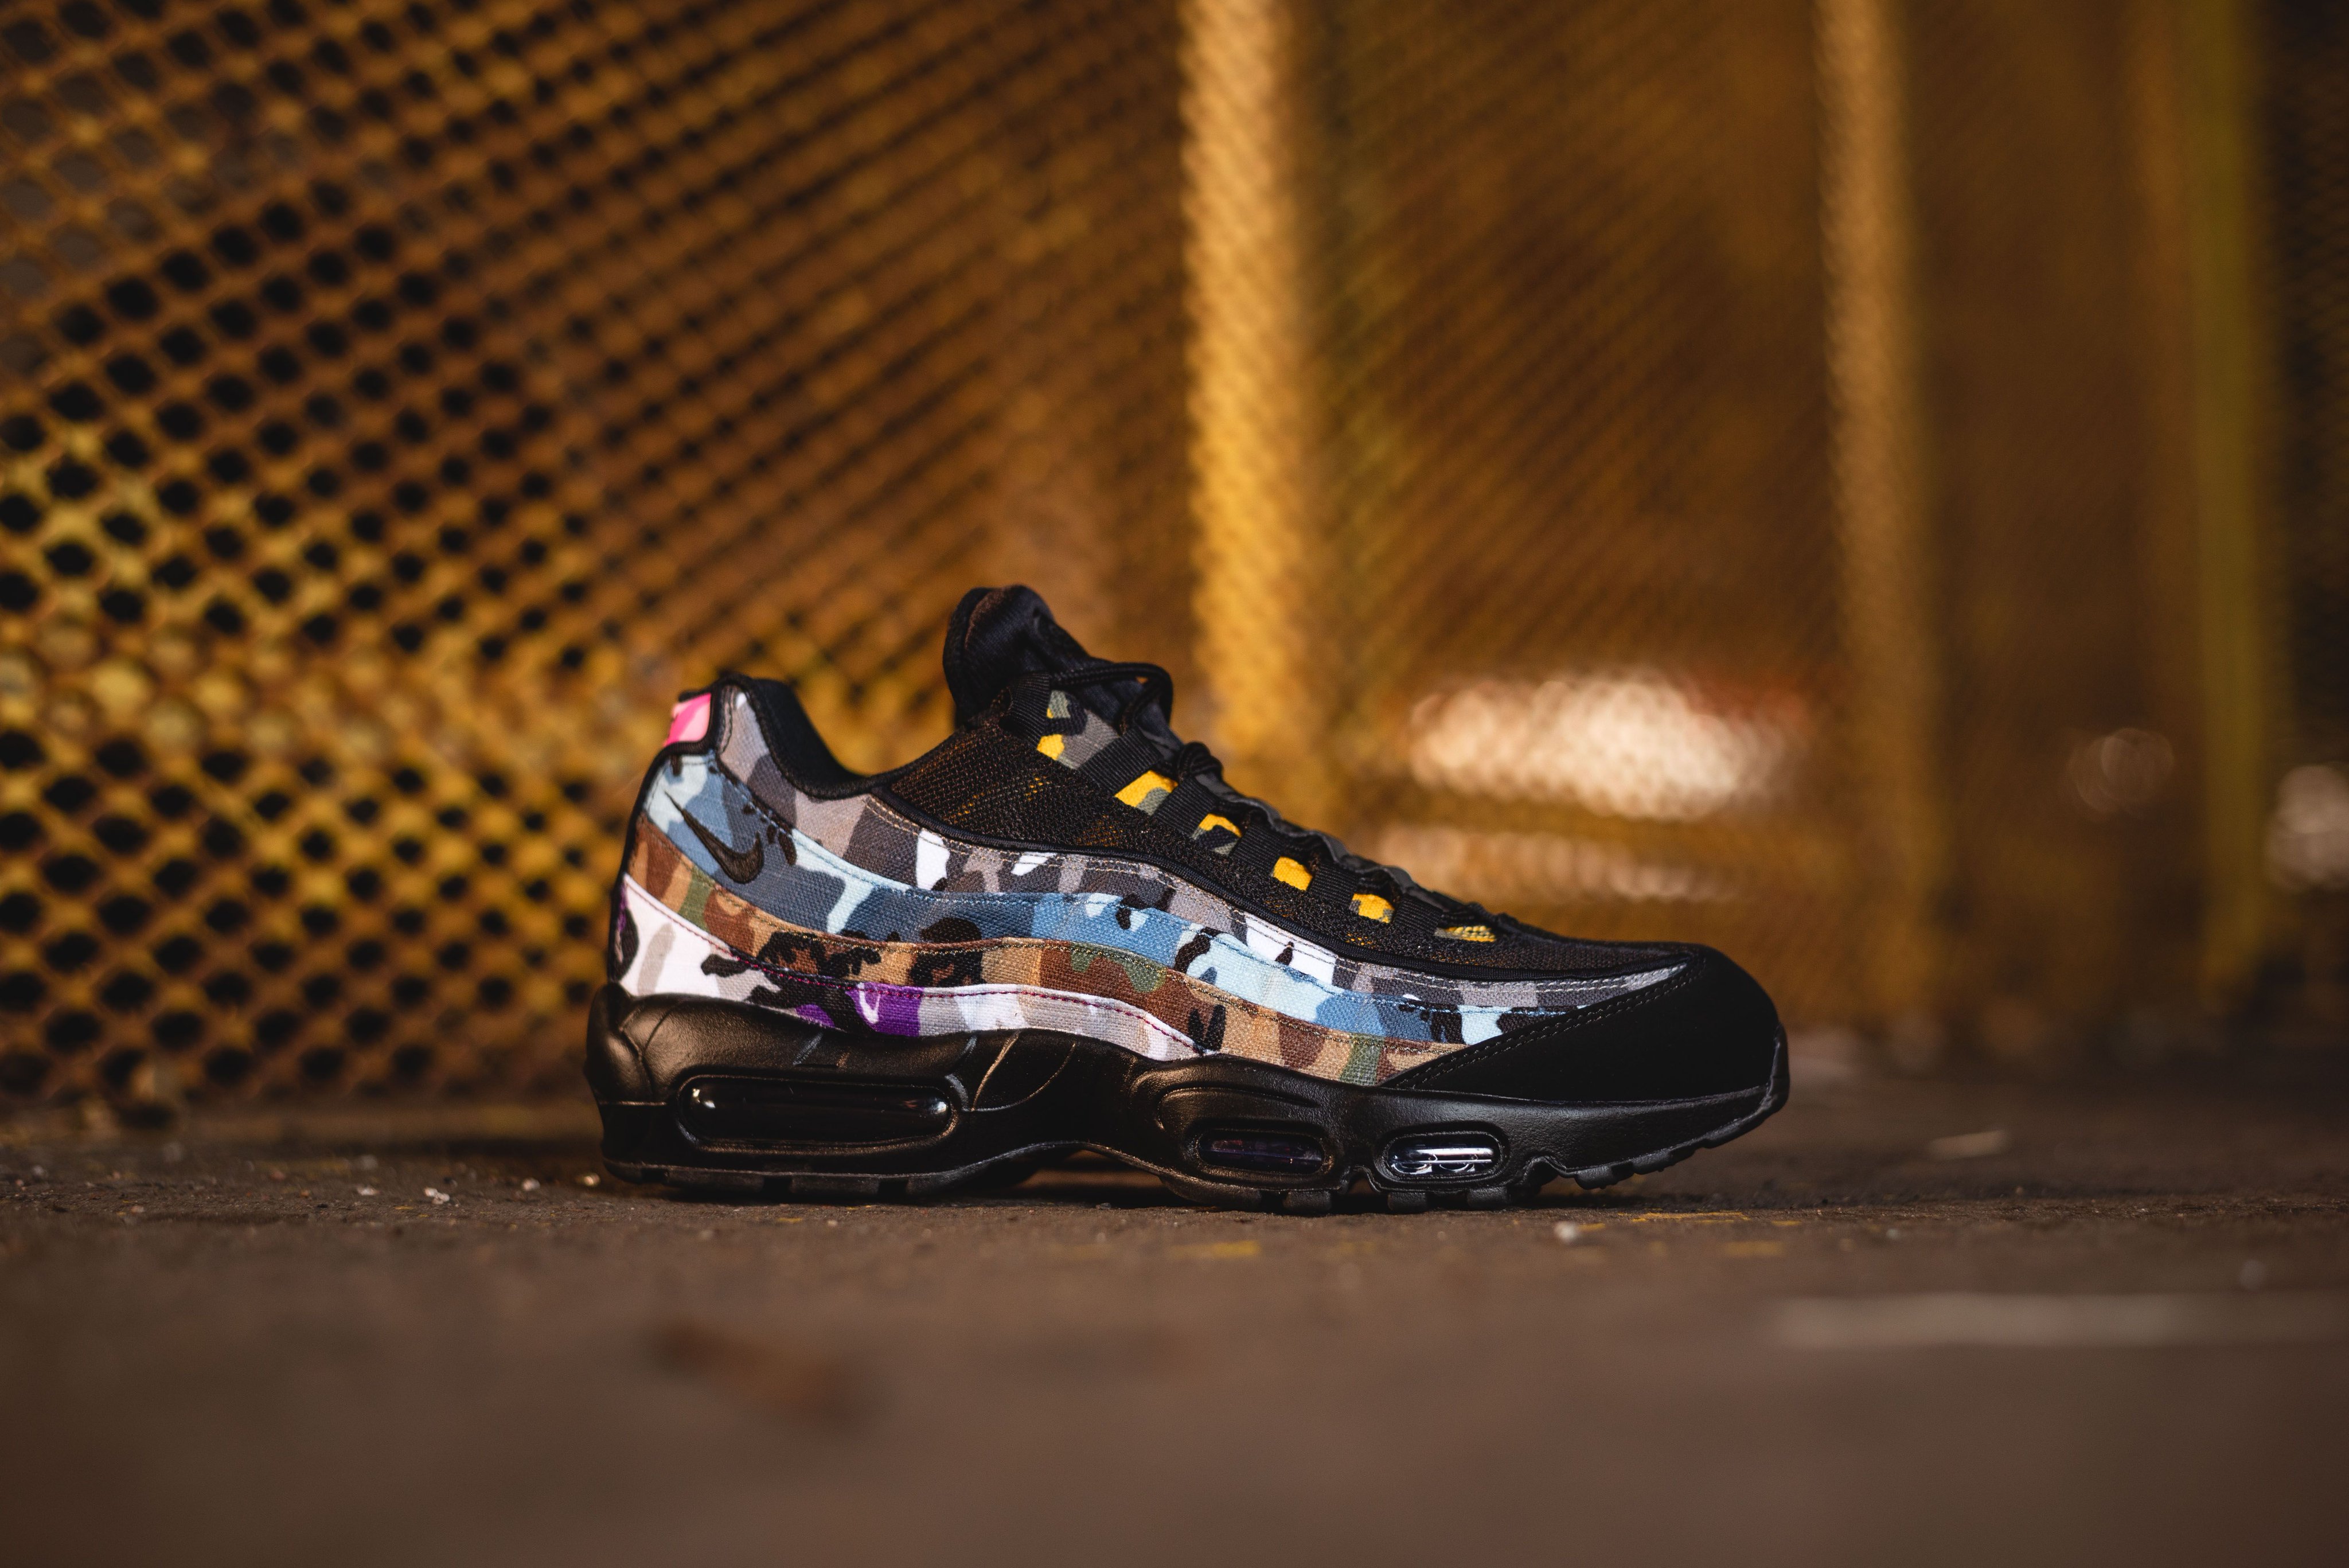 HANON on X: "Nike Air Max 95 ERDL Party is available to buy ONLINE now!  #hanon #nike #airmax95 #erdlparty https://t.co/wSE5cQeEhc  https://t.co/Dui0Qr7vaC" / X